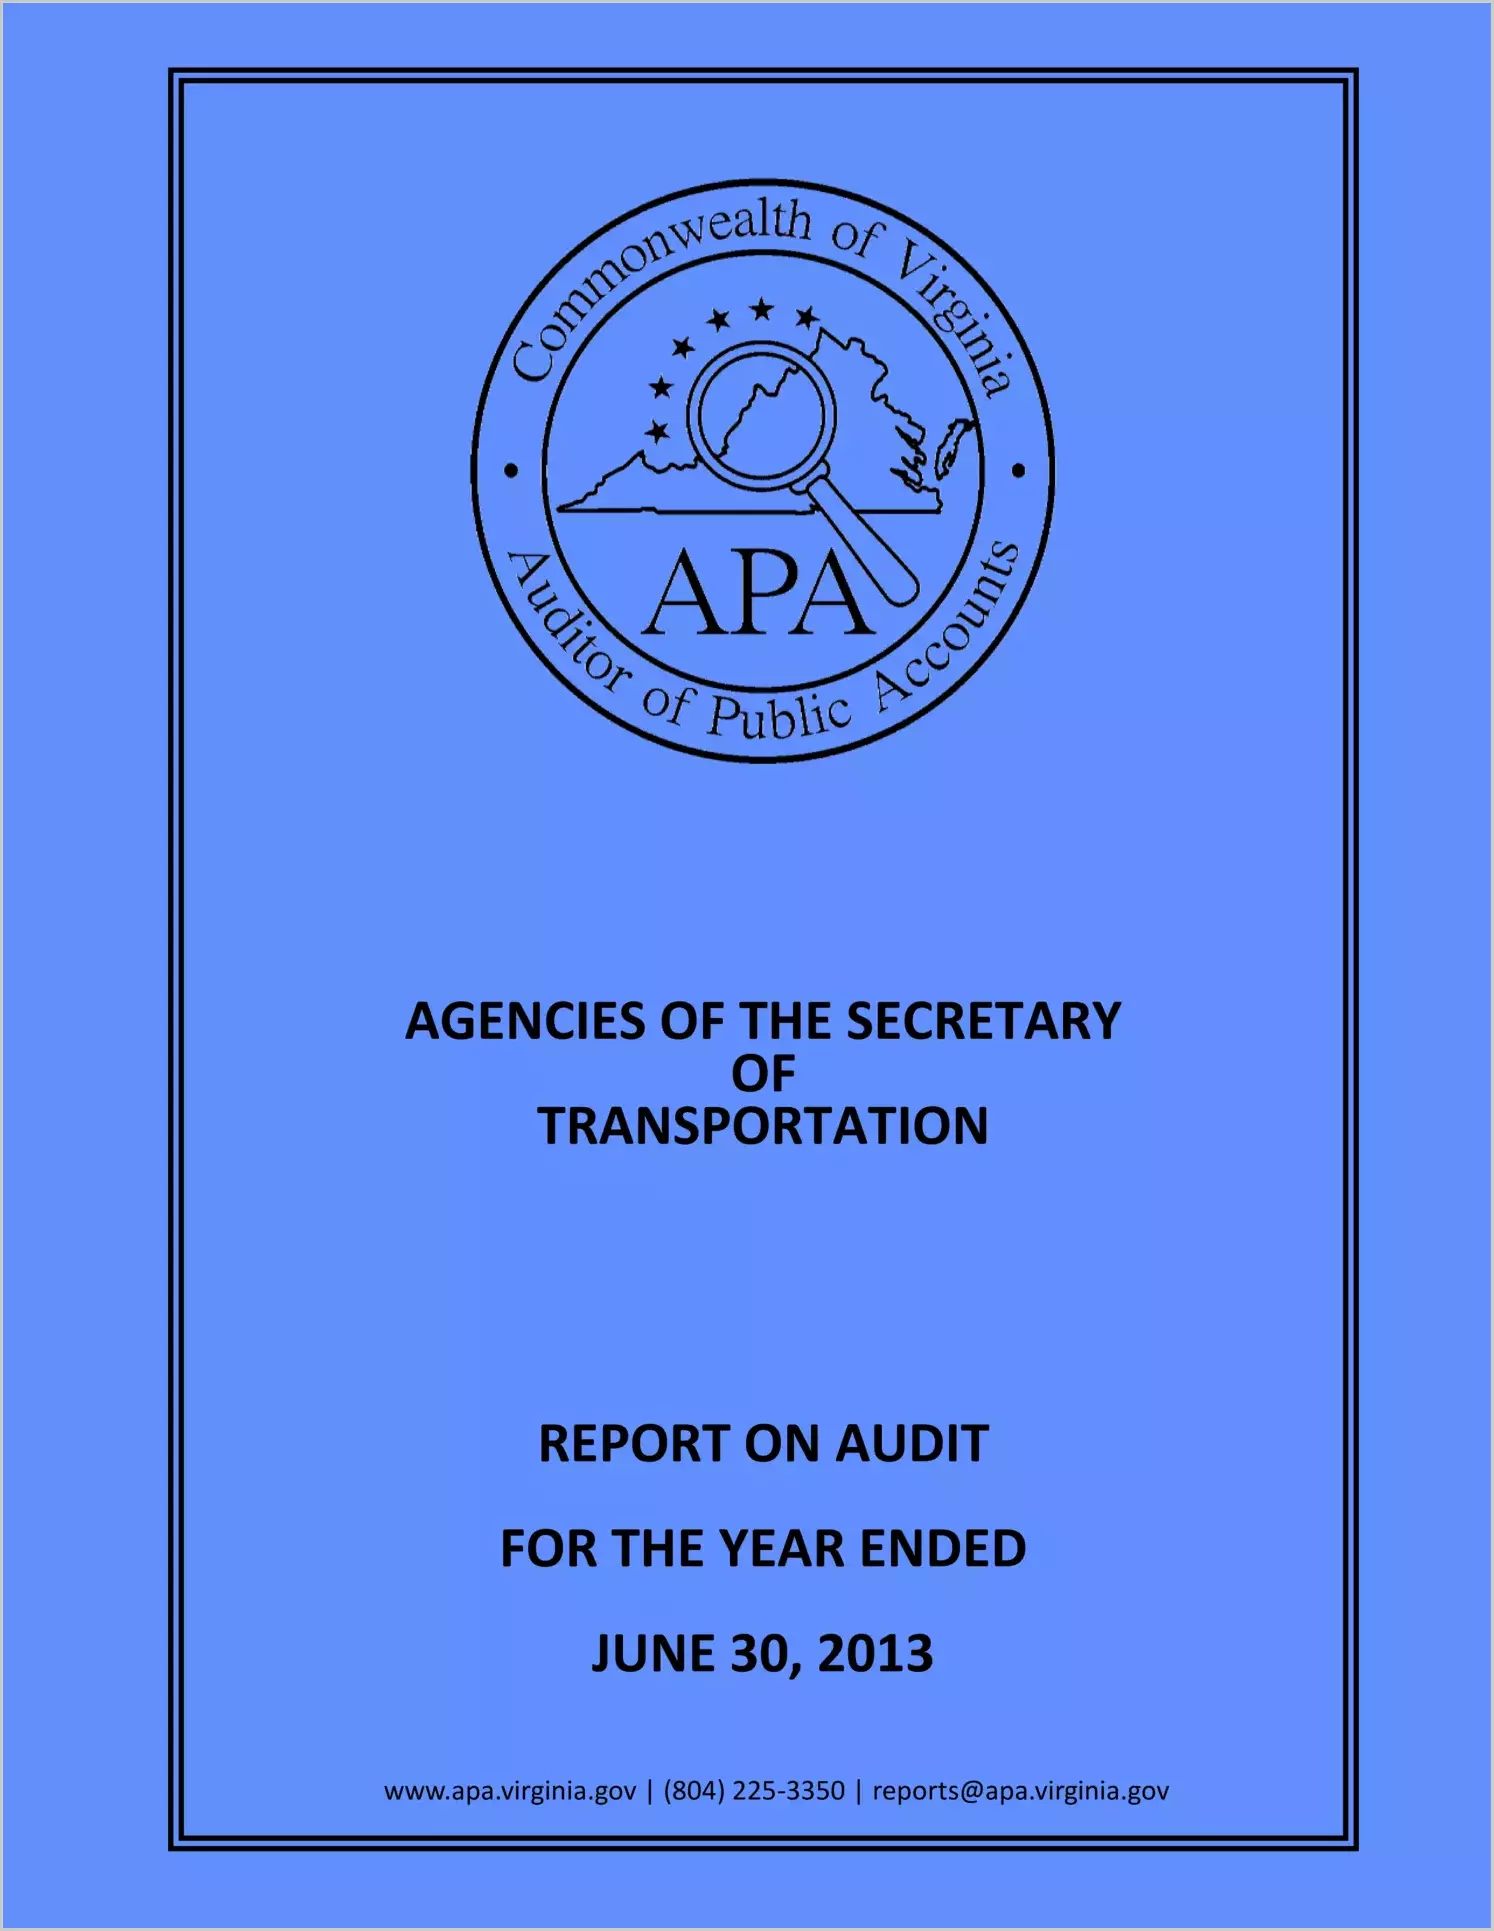 Agencies of the Secretary of Transportation for the year ended June 30, 2013